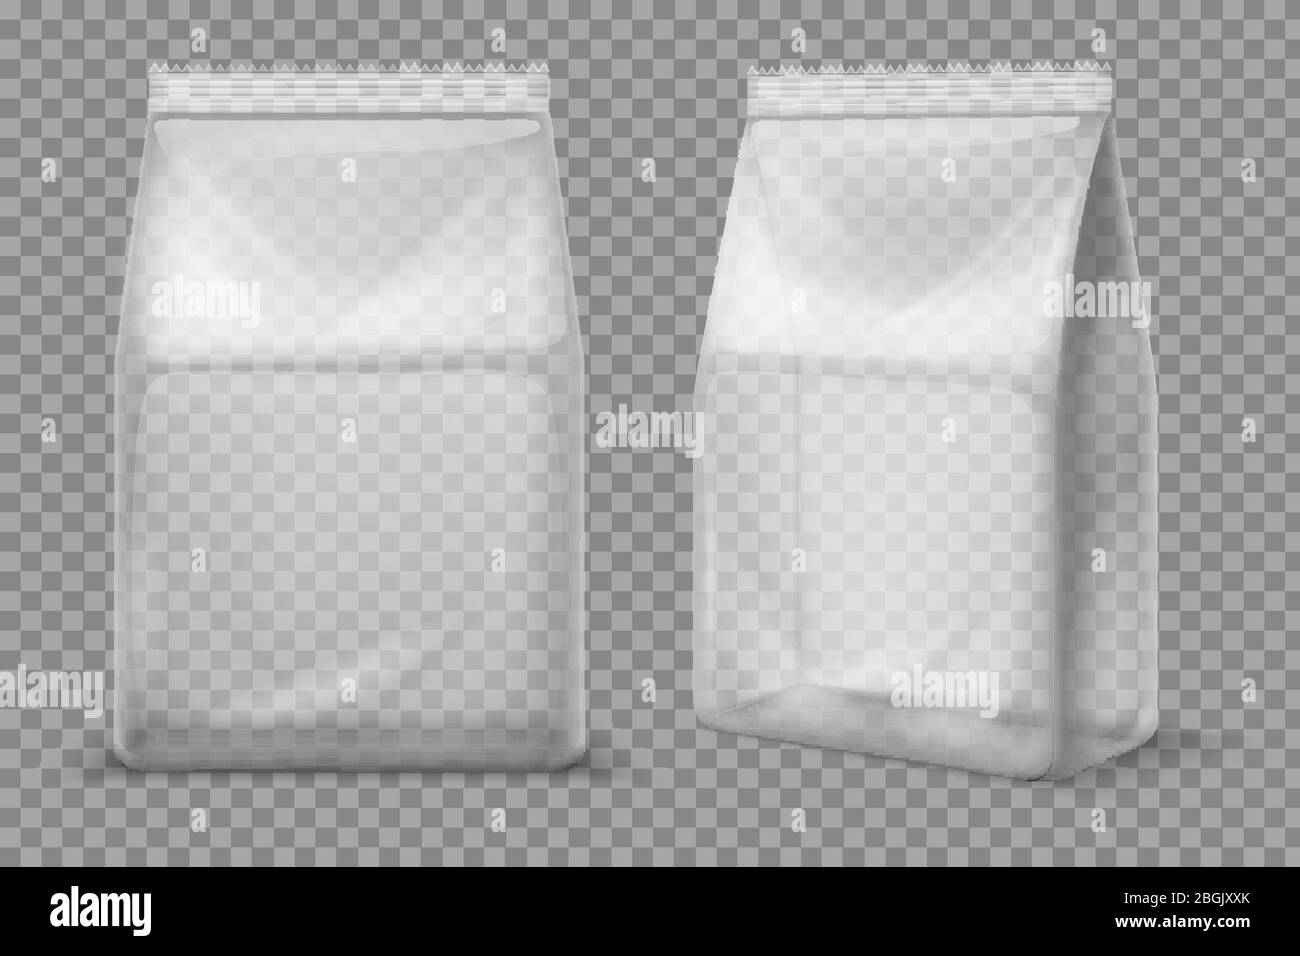 Plastic snack bag. Transparent food blank sachet. 3d vector package isolated mockup. Illustration collection of sachet bag, pack blank, plastic package for food Stock Vector